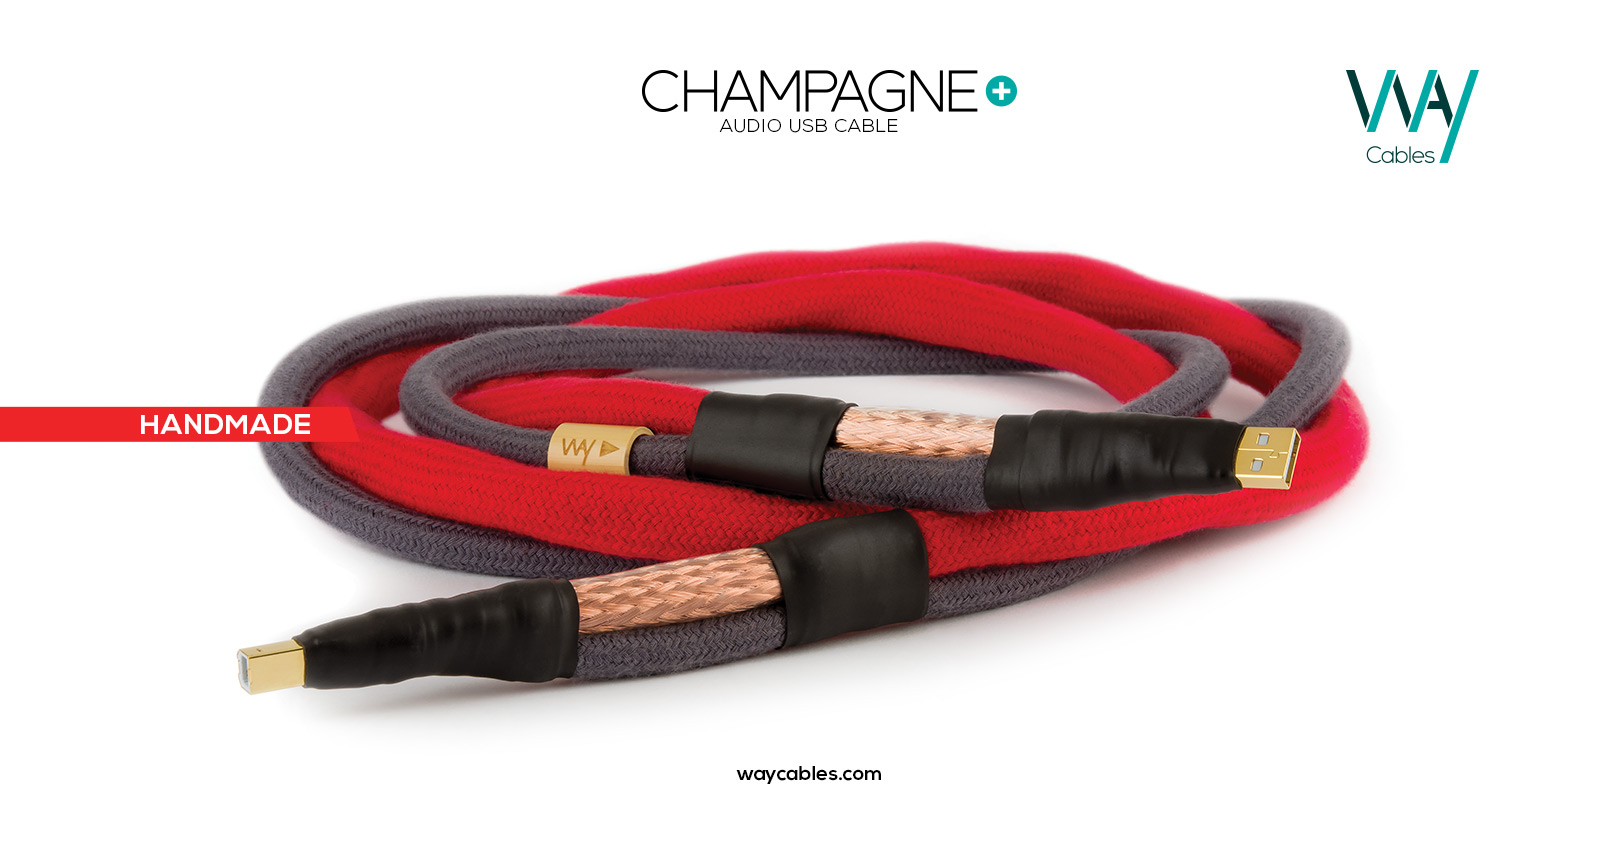 WAY Cables - digital audio USB cable Champagne Plus